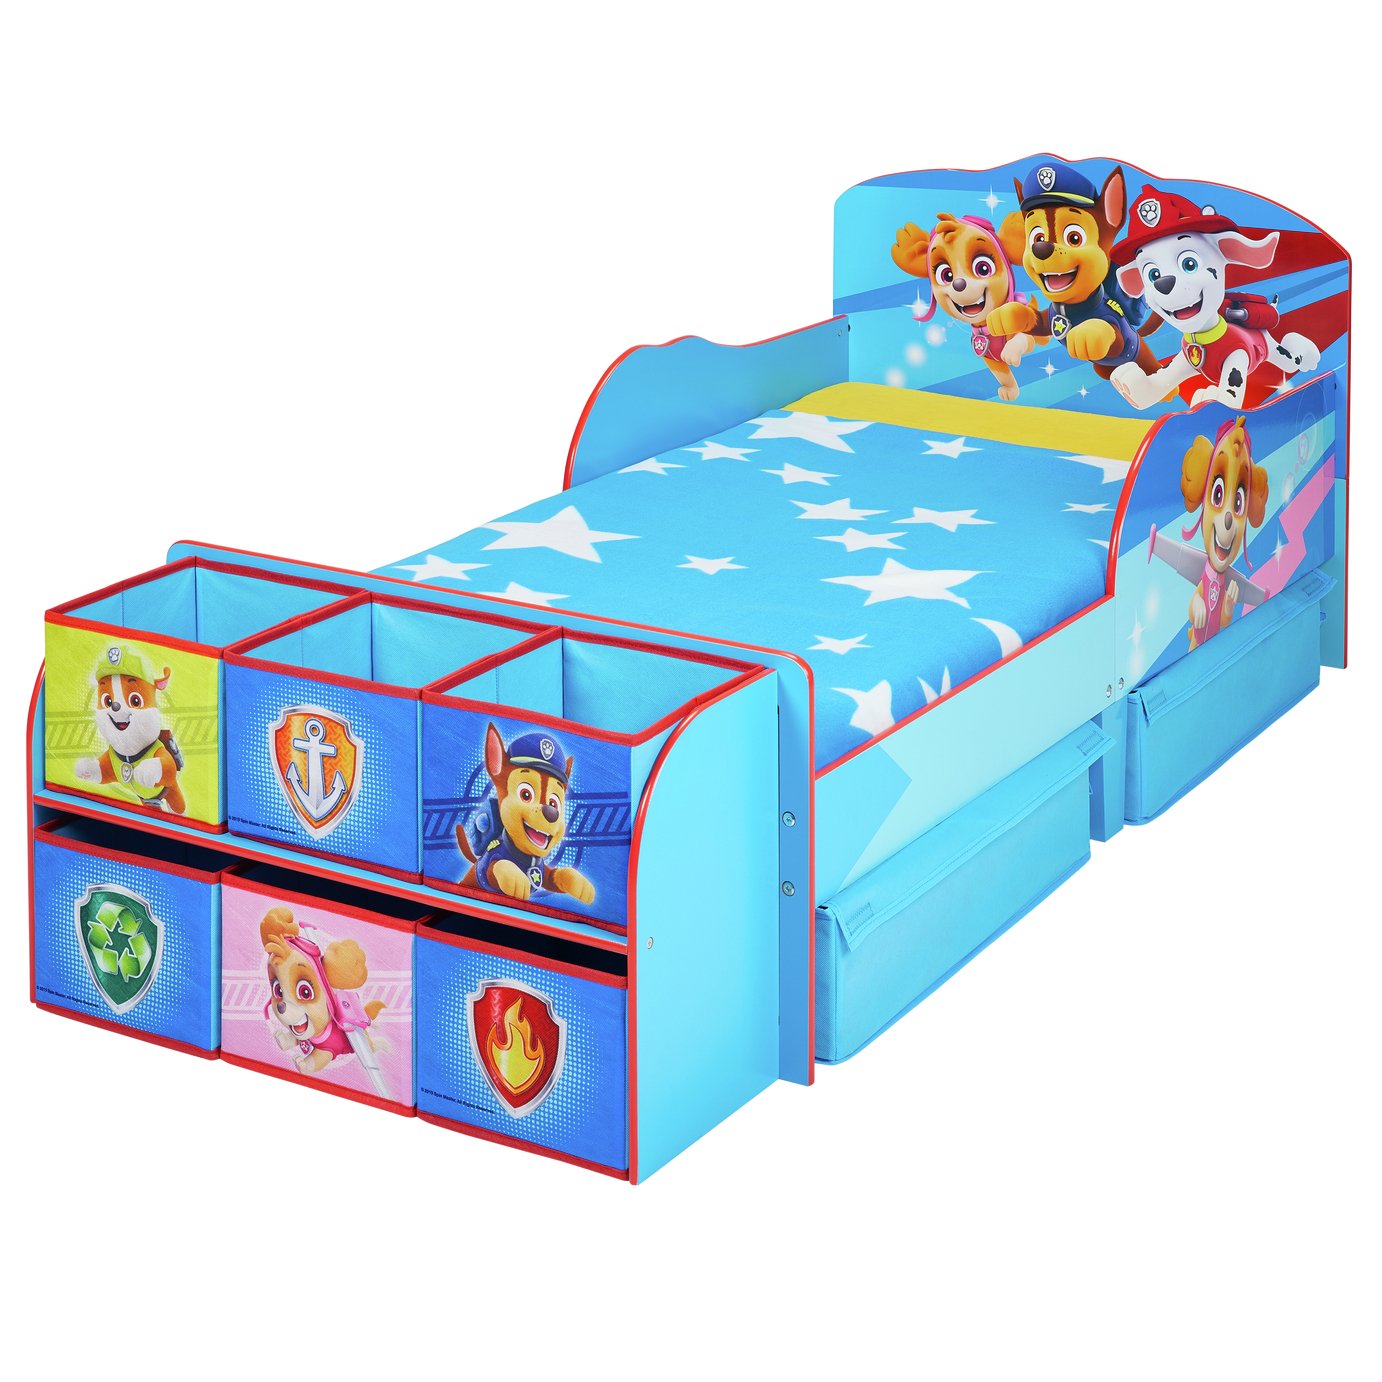 Paw Patrol Toddler Bed Cube & Mattress Review